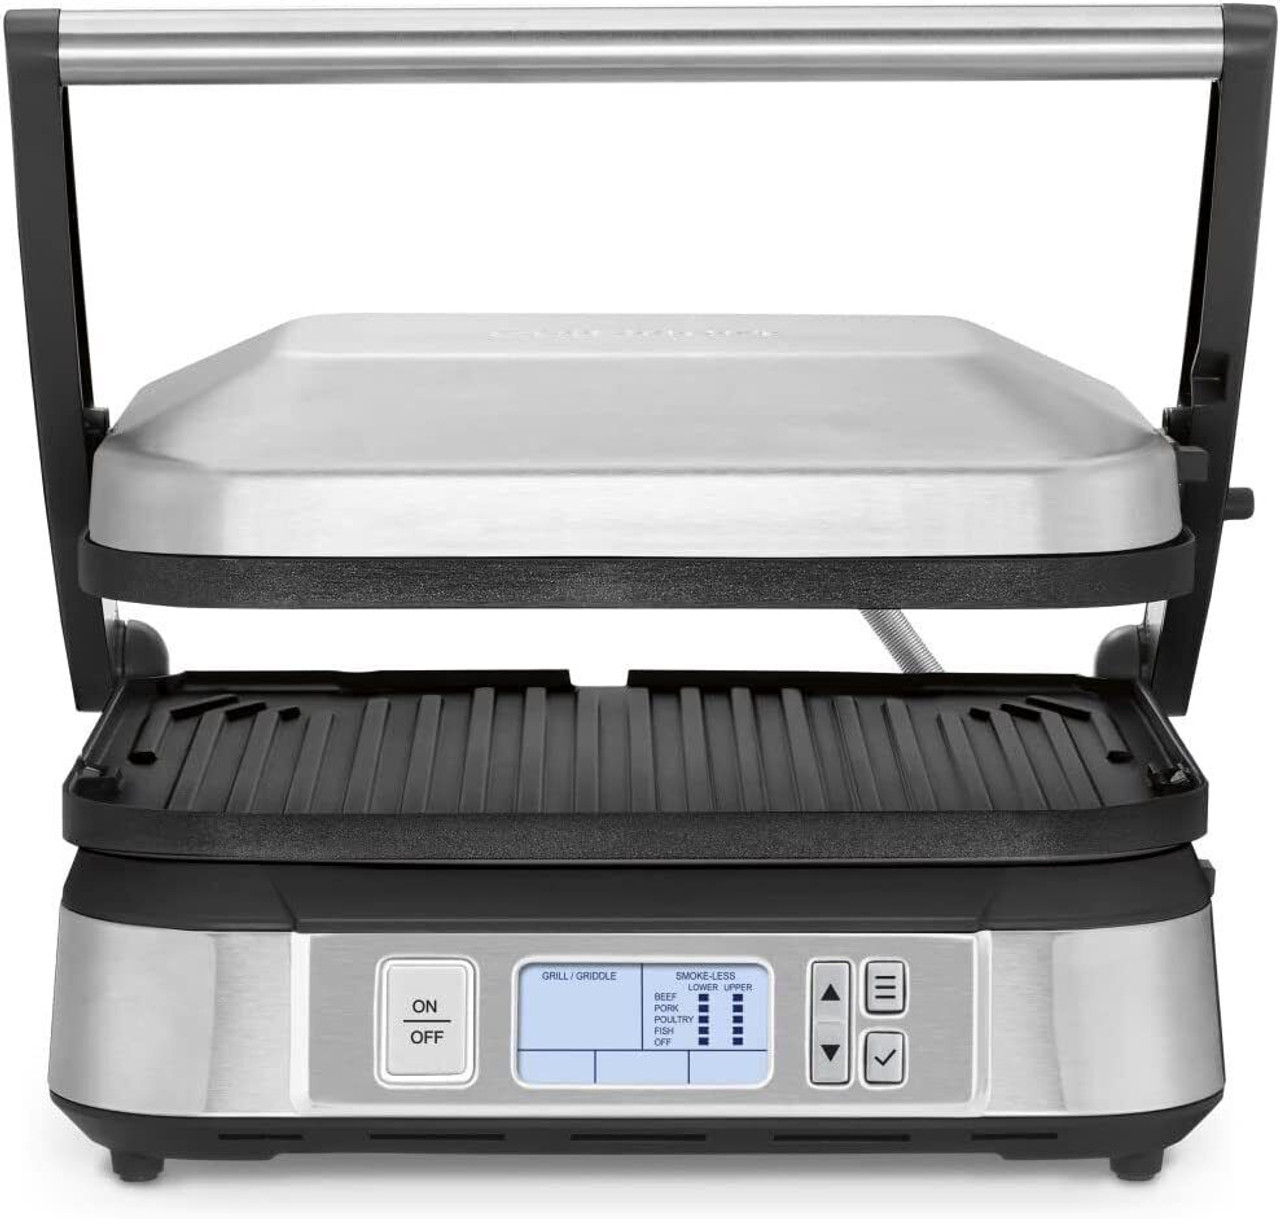 Power Smokeless Indoor Electric 1,500W Grill (Refurbished)